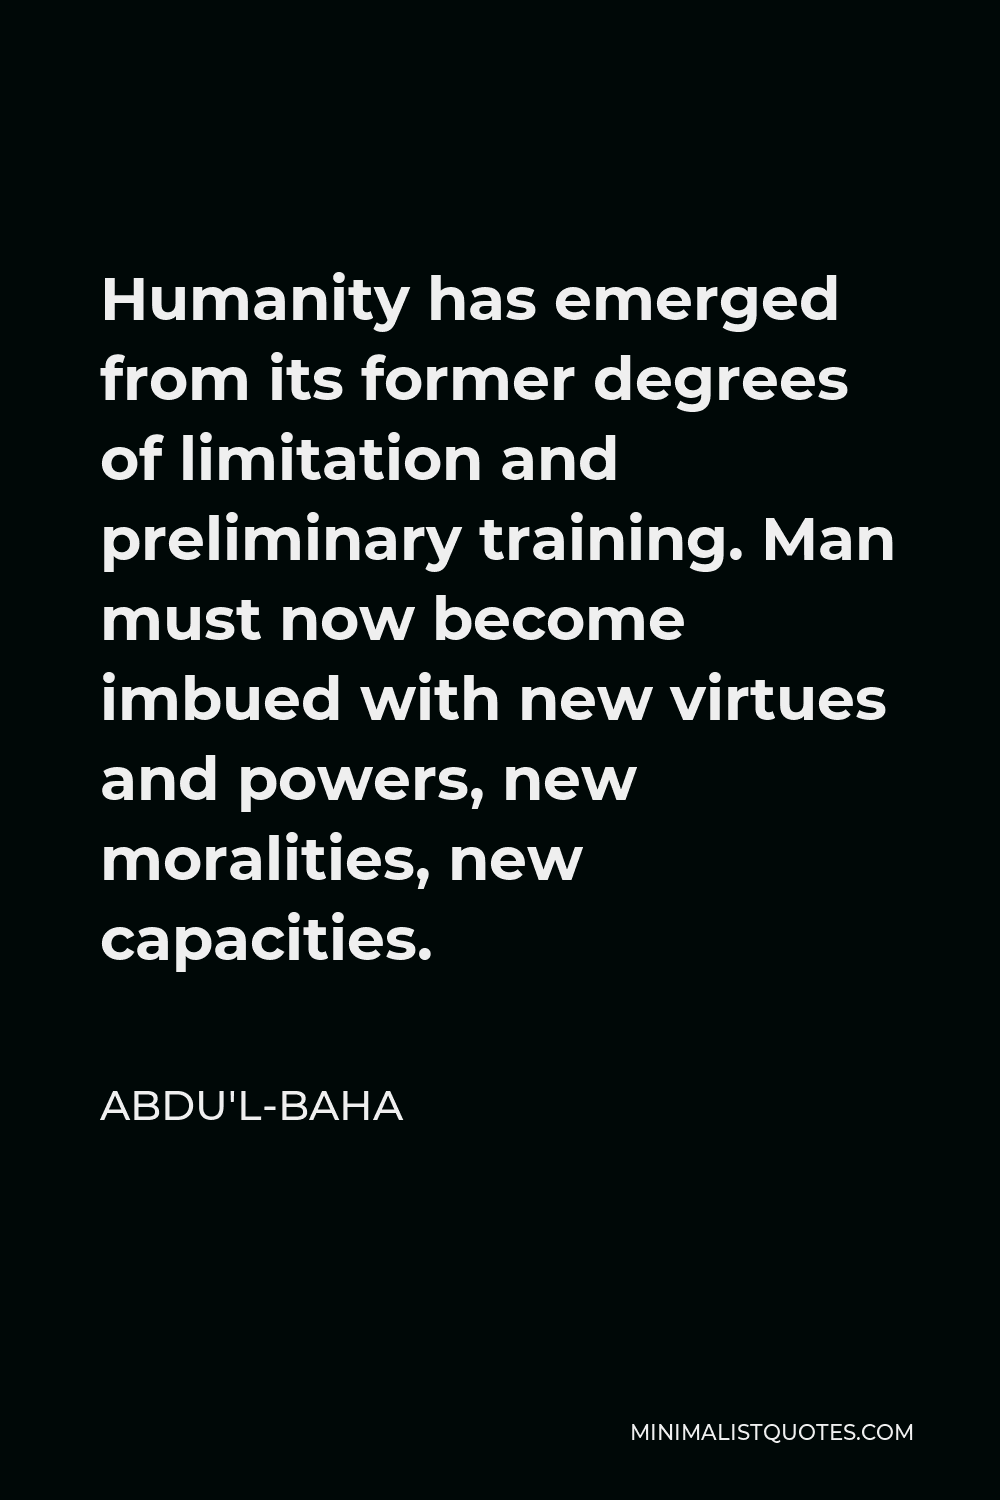 Abdu'l-Baha Quote - Humanity has emerged from its former degrees of limitation and preliminary training. Man must now become imbued with new virtues and powers, new moralities, new capacities.